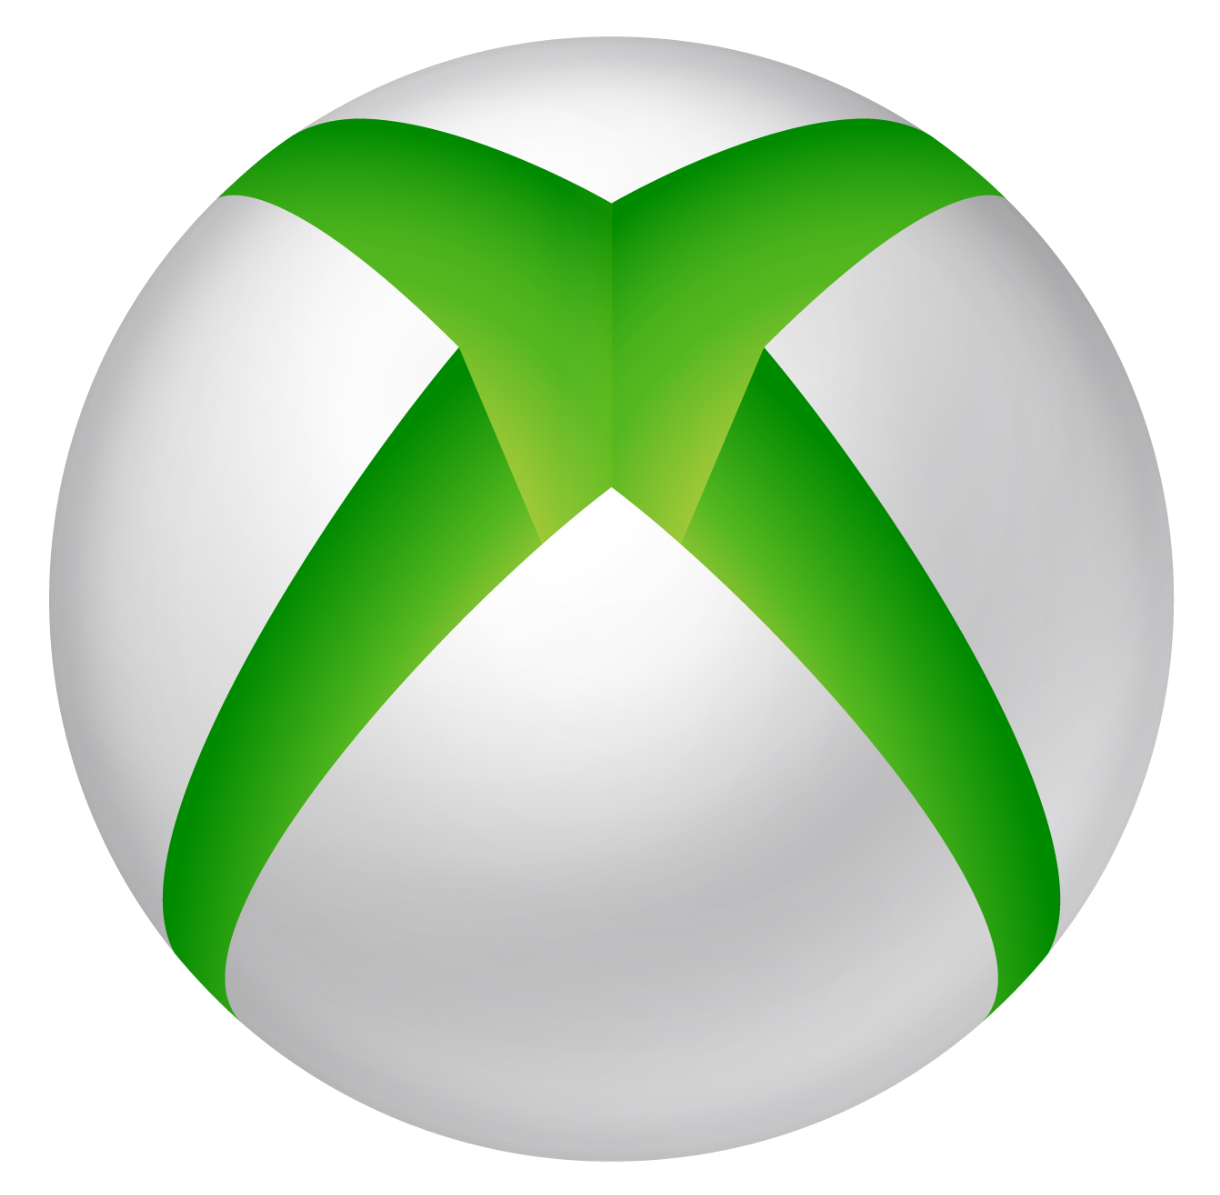 Xbox Logo PNG Image - PurePNG | Free transparent CC0 PNG Image Library